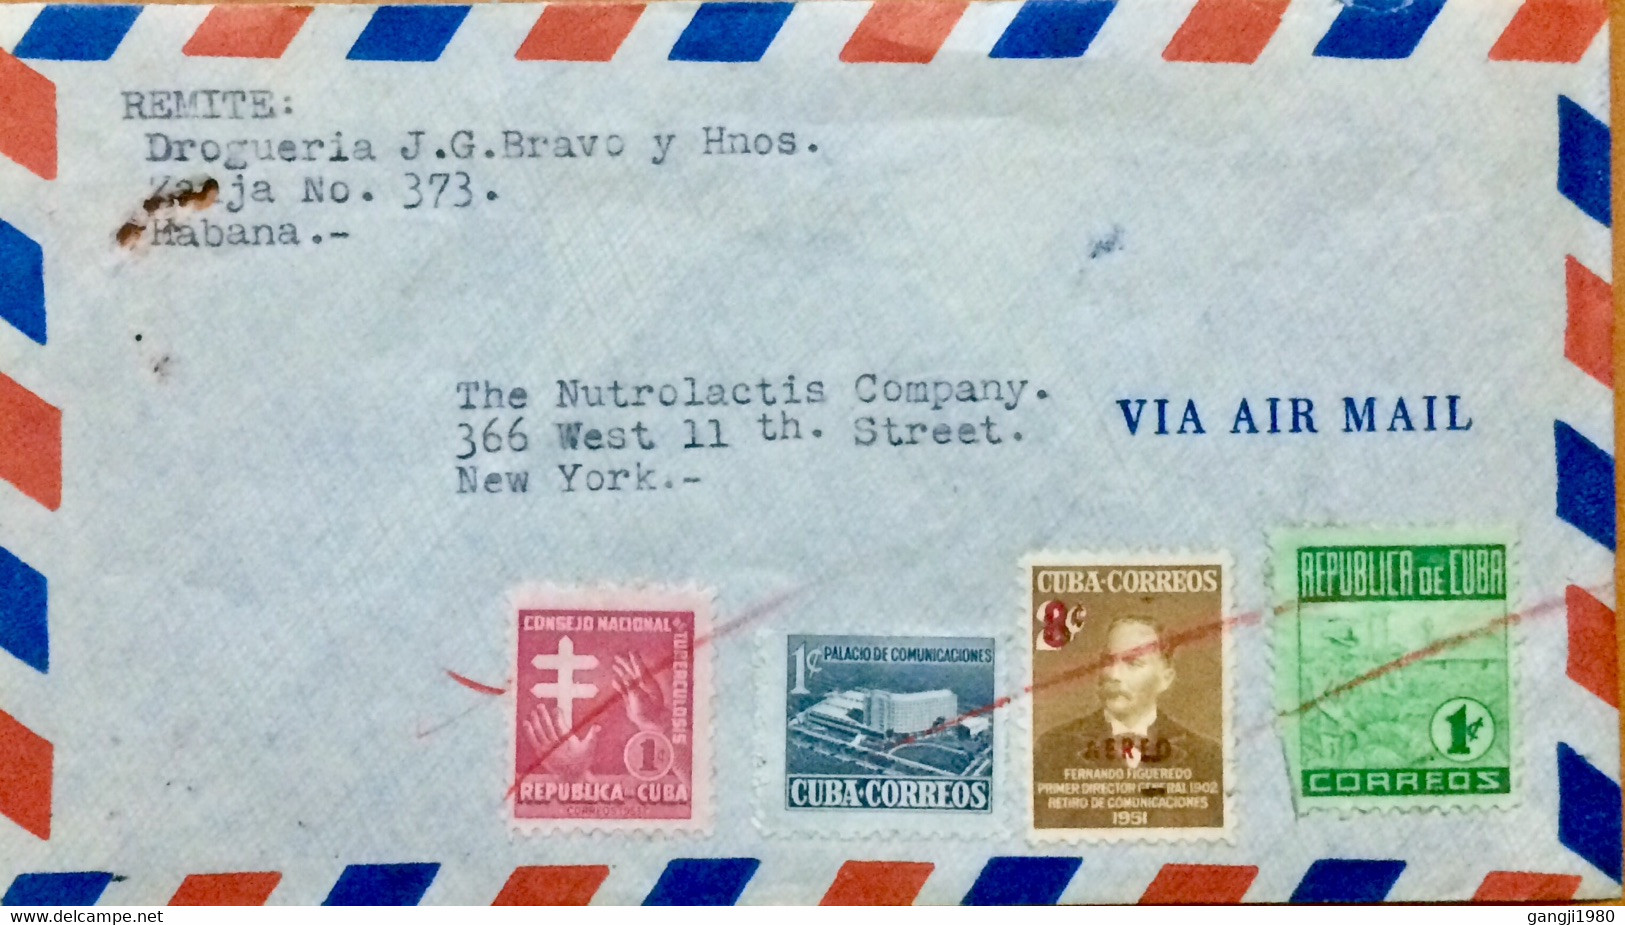 CUBA 1952, COVER USED TO USA, F.FIGUEREDO STAMP OVPTD, POST BUILDING, TOBACCO, TUBERCULOSIS, NEW YORK, OLD CHELSEA STATI - Covers & Documents